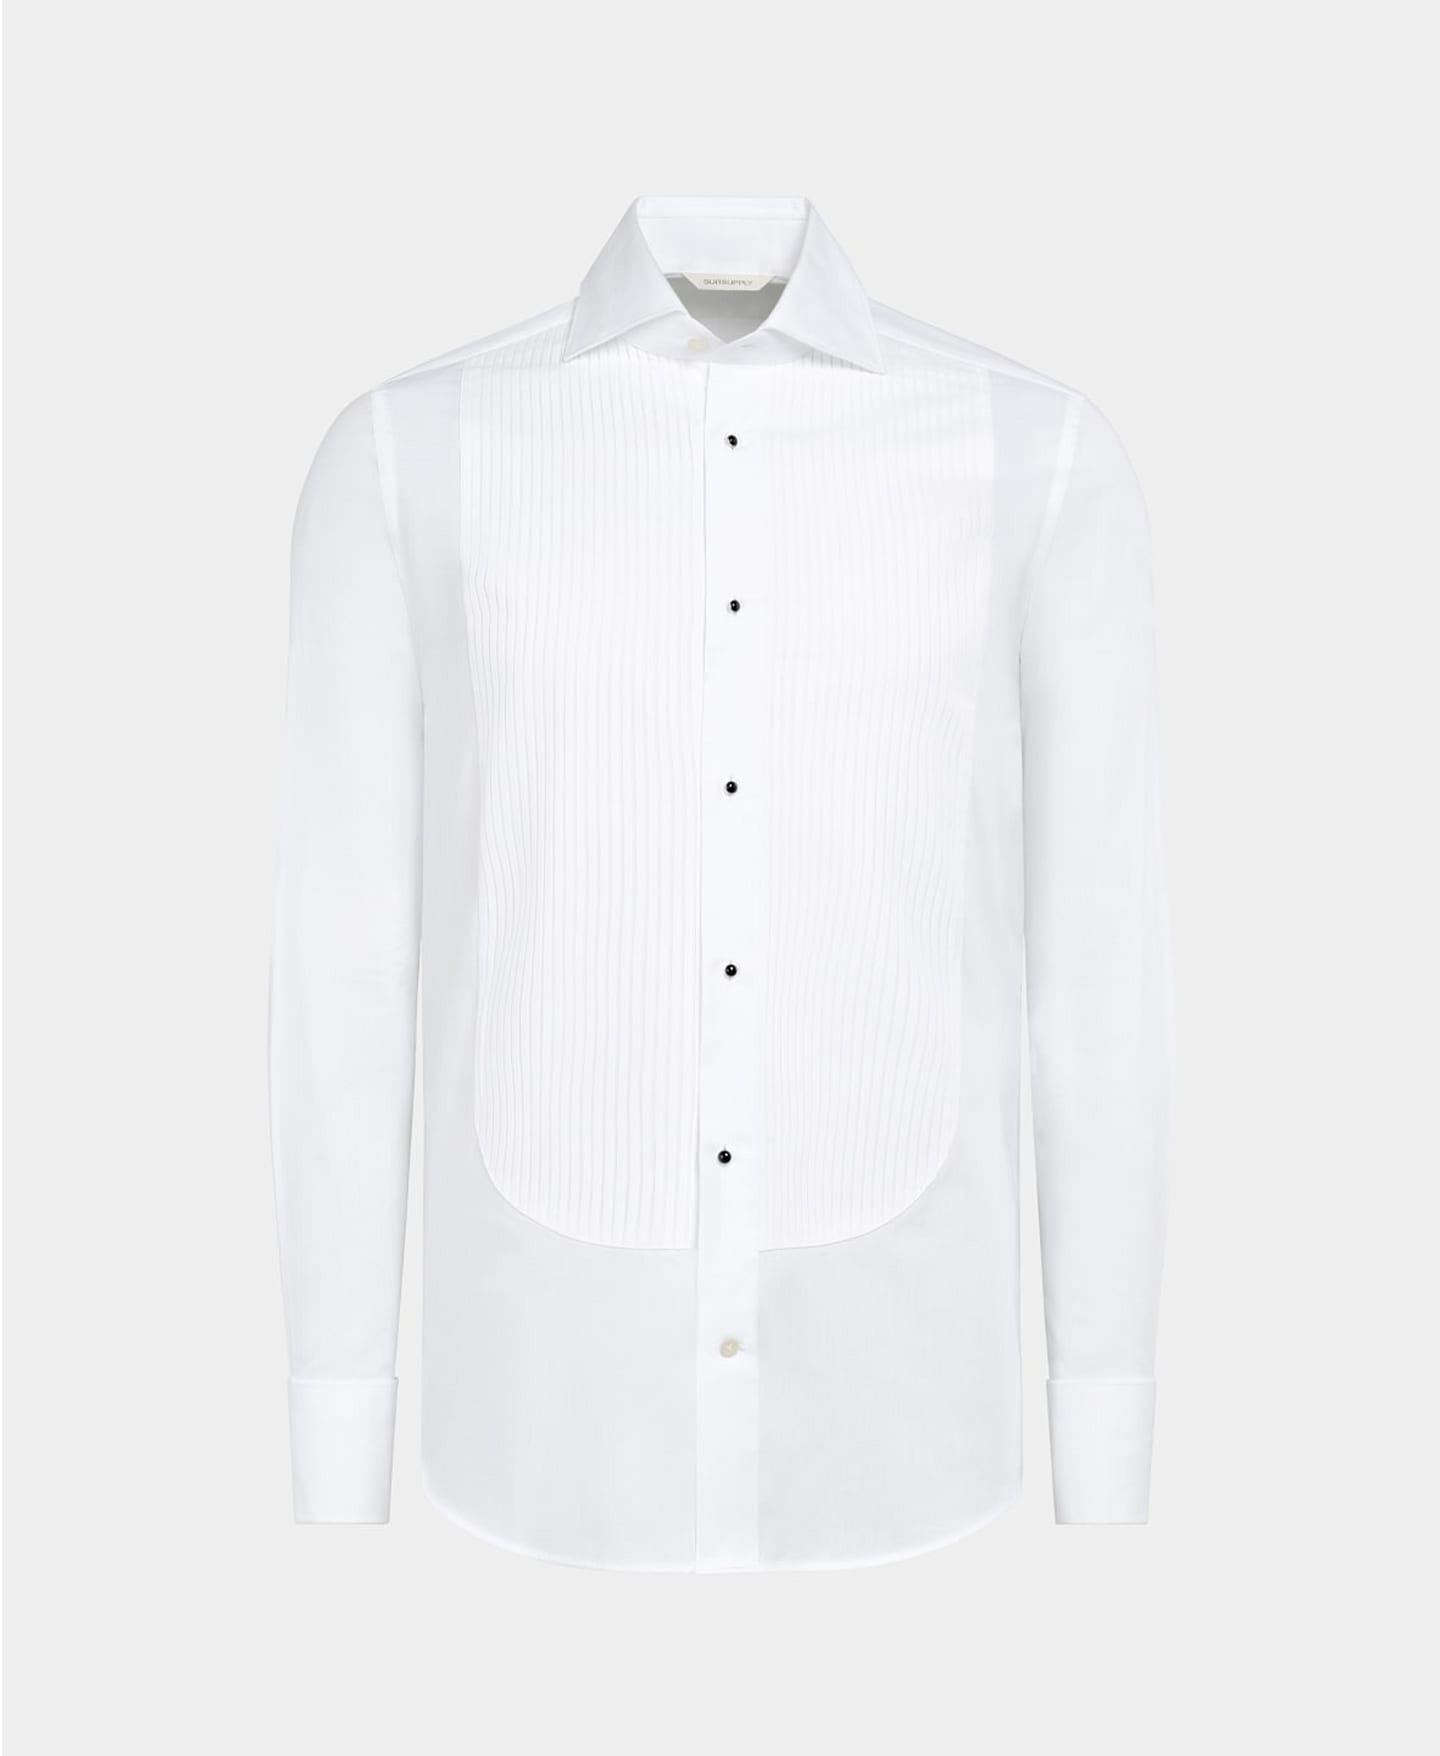 White pleated bib-front tuxedo shirt with black enamel stud buttons.